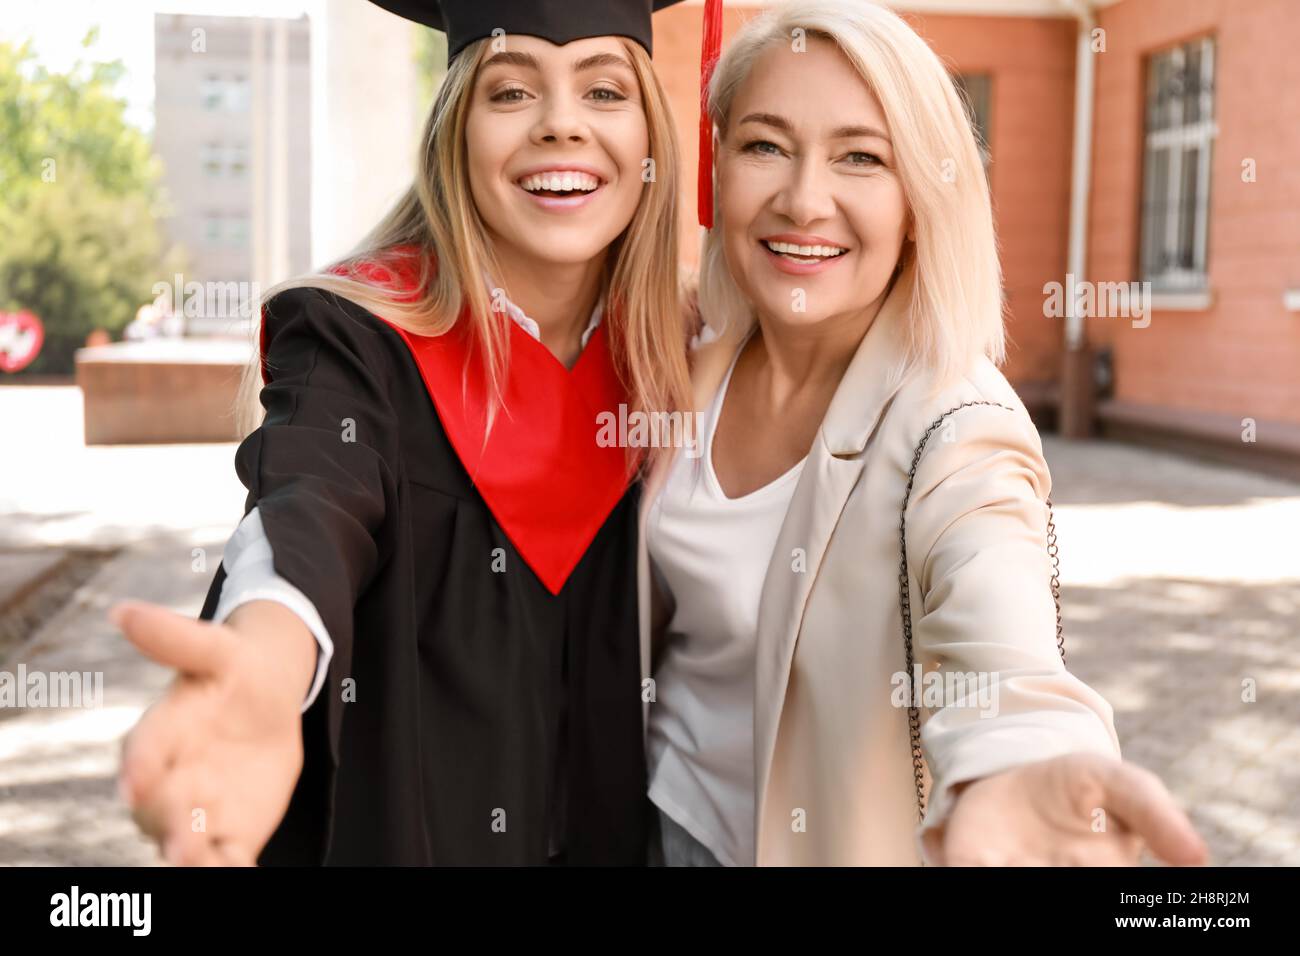 Happy young woman with her mother on graduation day Stock Photo